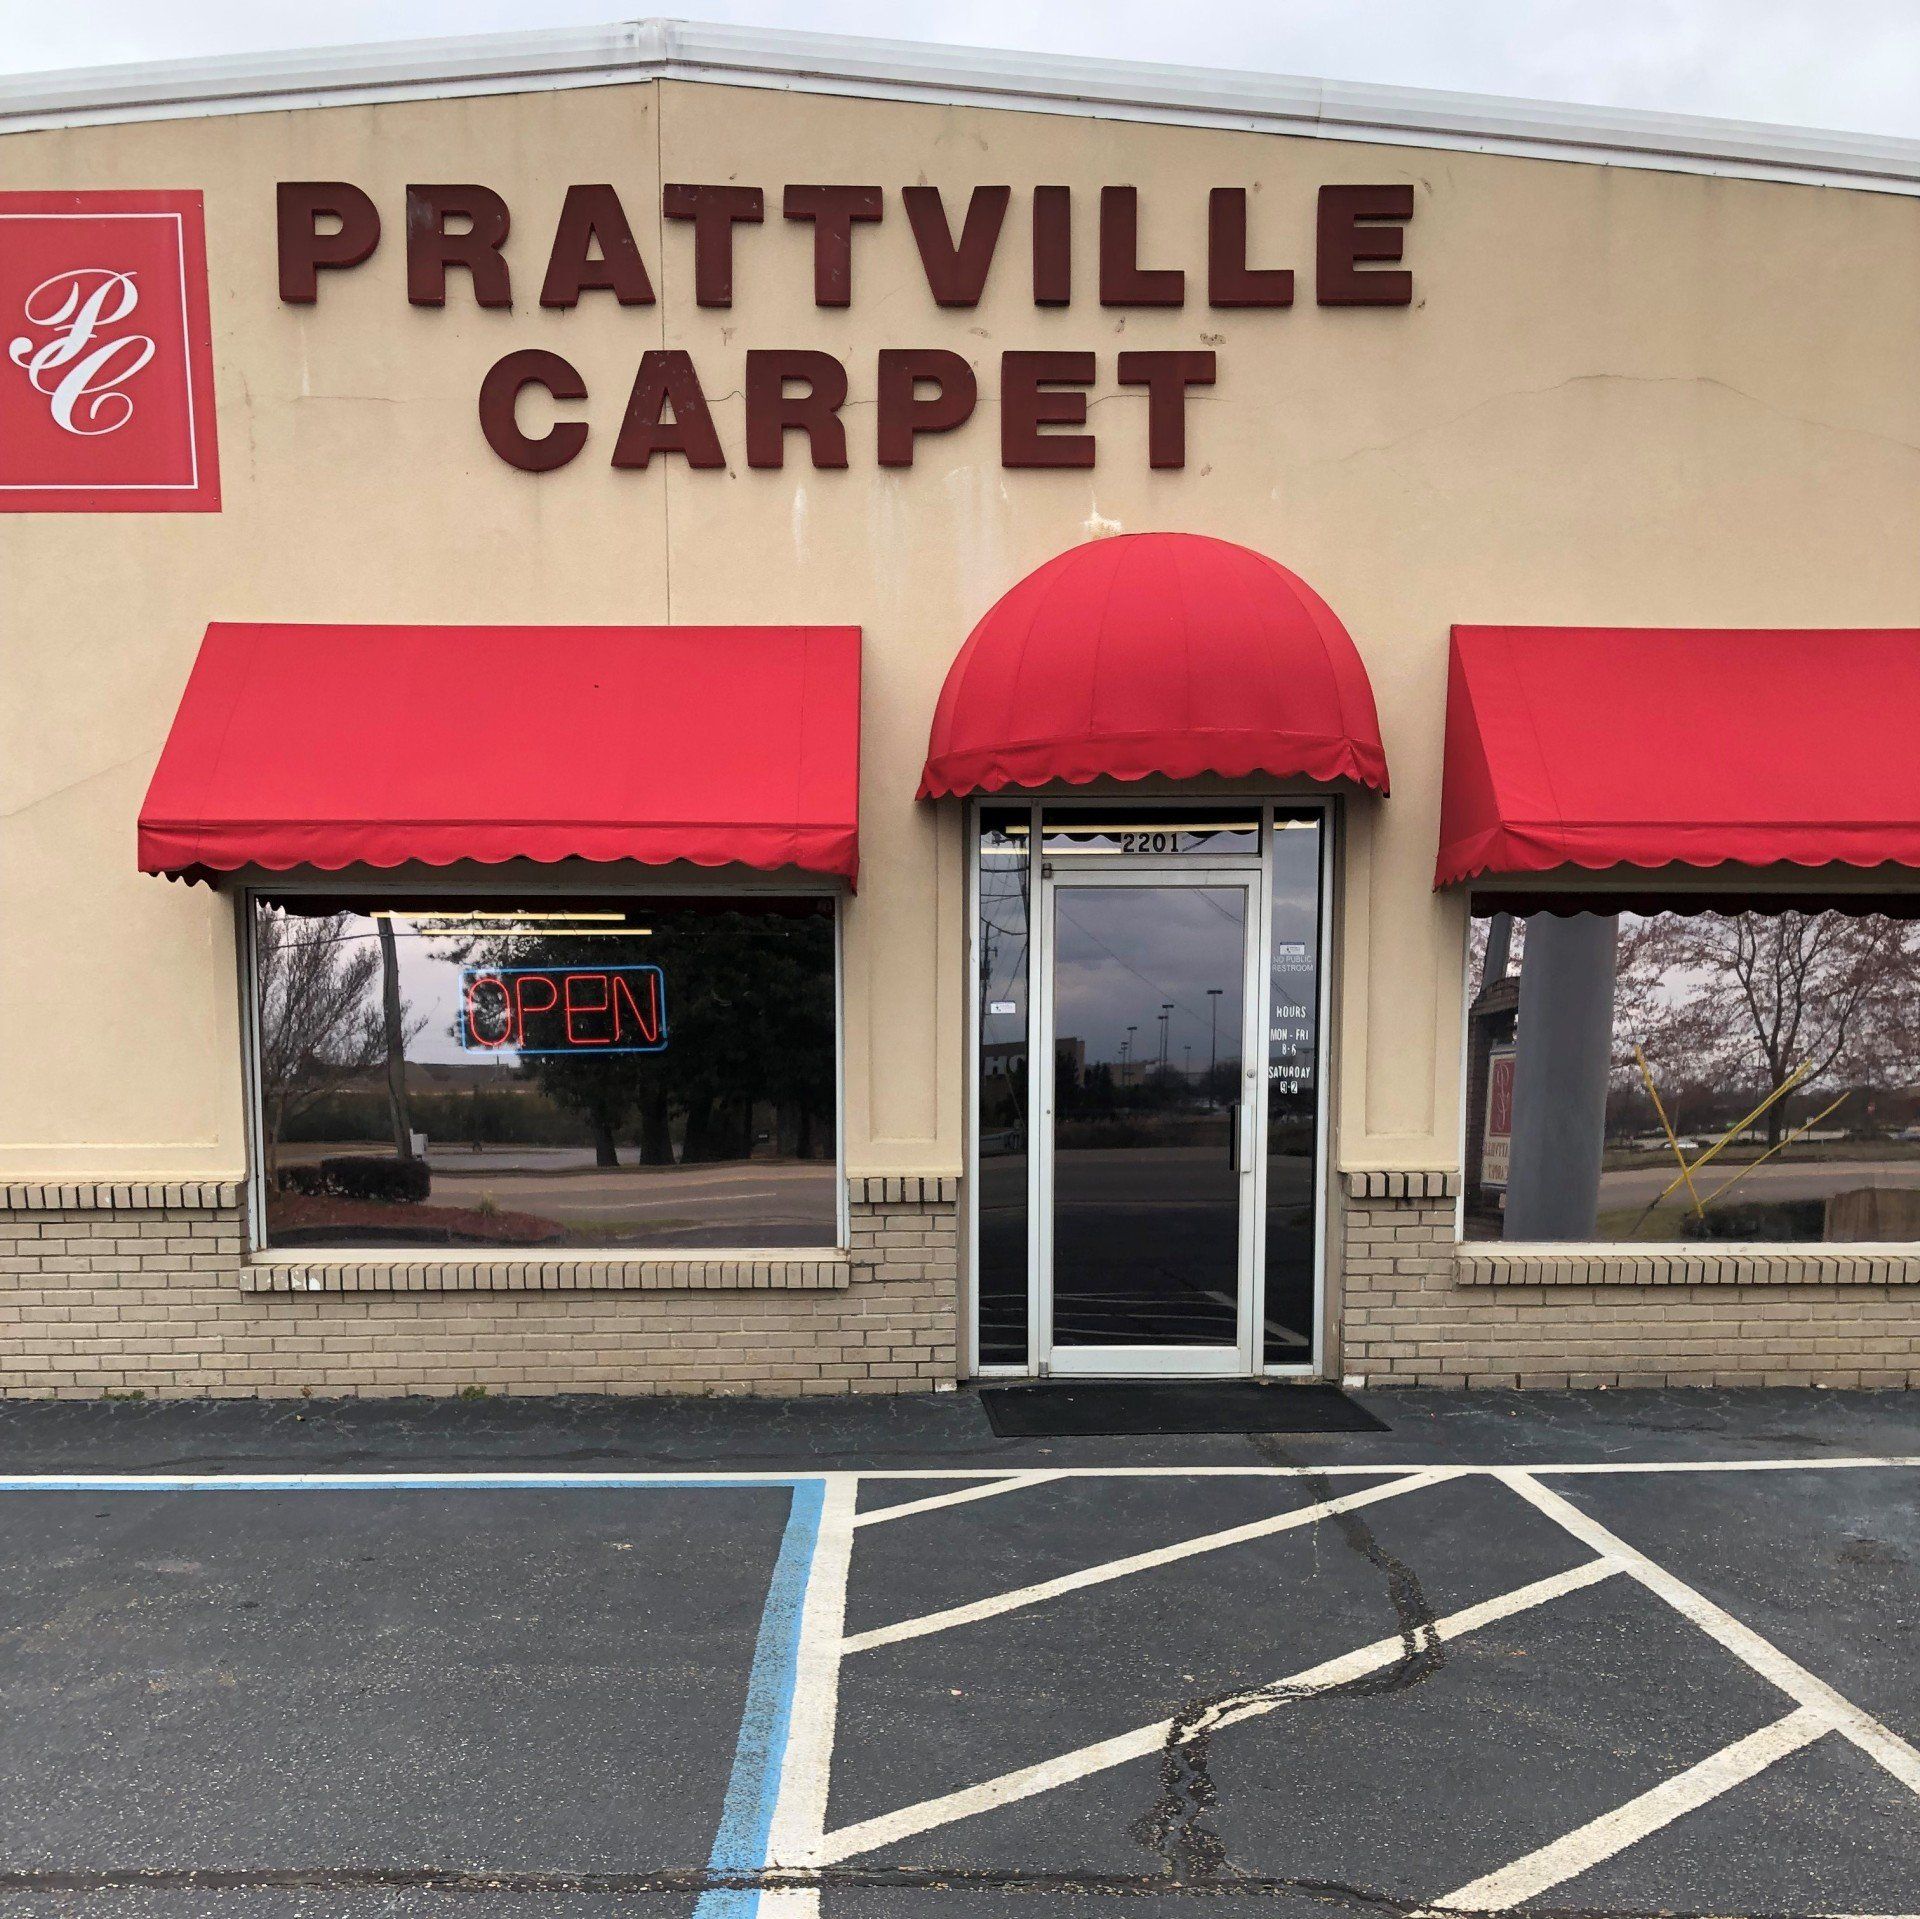 Professional tinted storefront windows at Prattville Carpet - Business tint installation 1.14.2019 in Prattville, AL